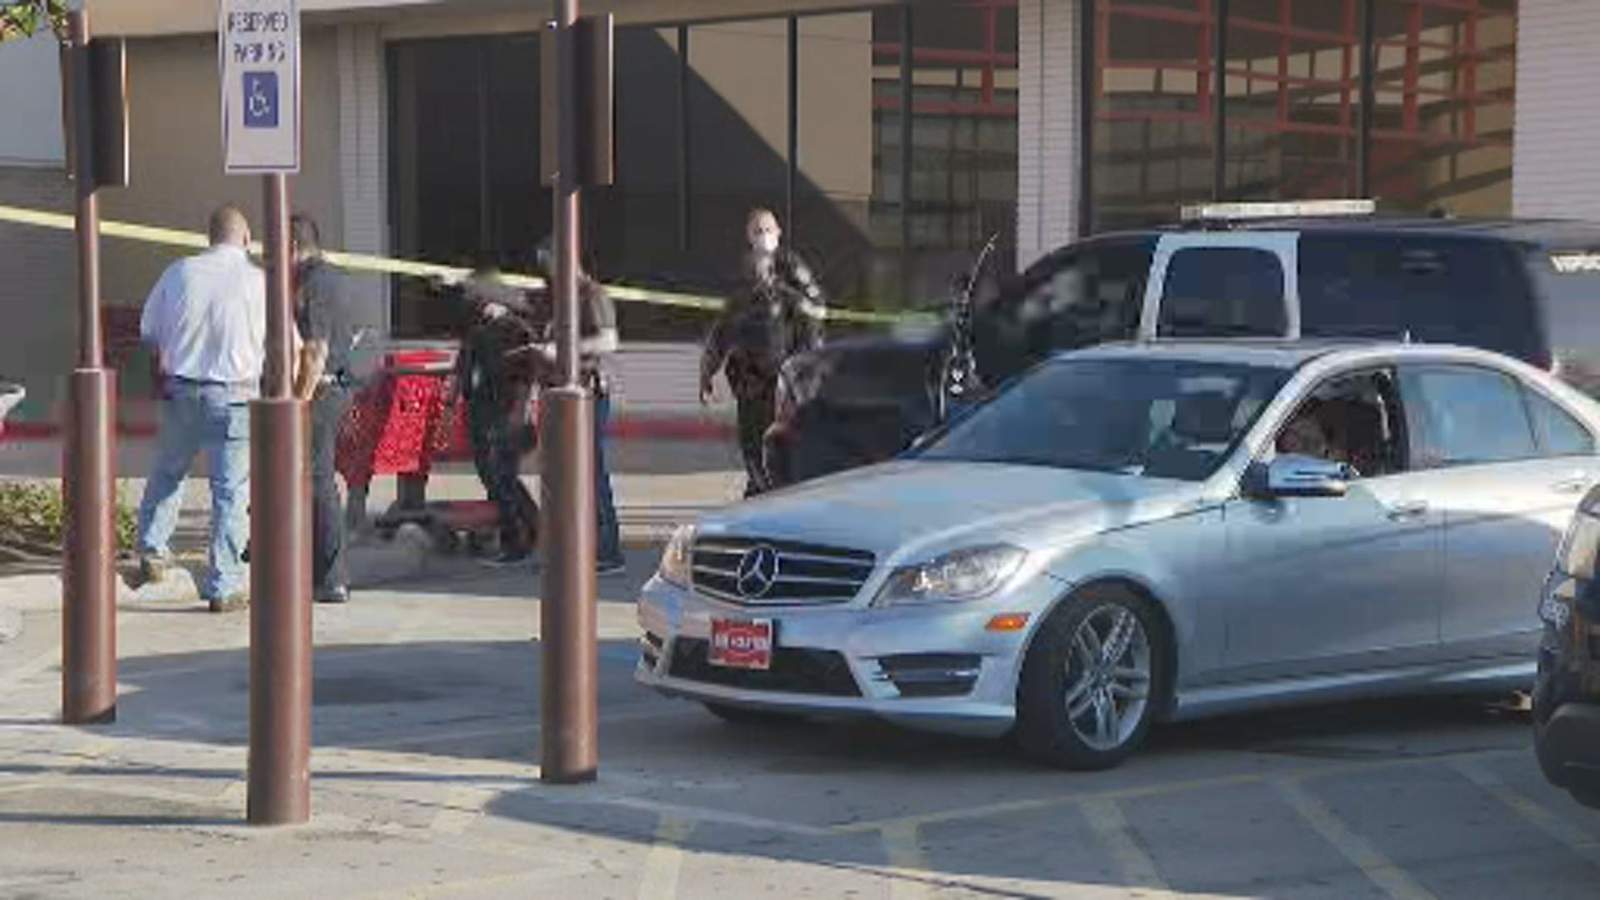 Shooting between 2 people causes stampede at Memorial City Mall, police say